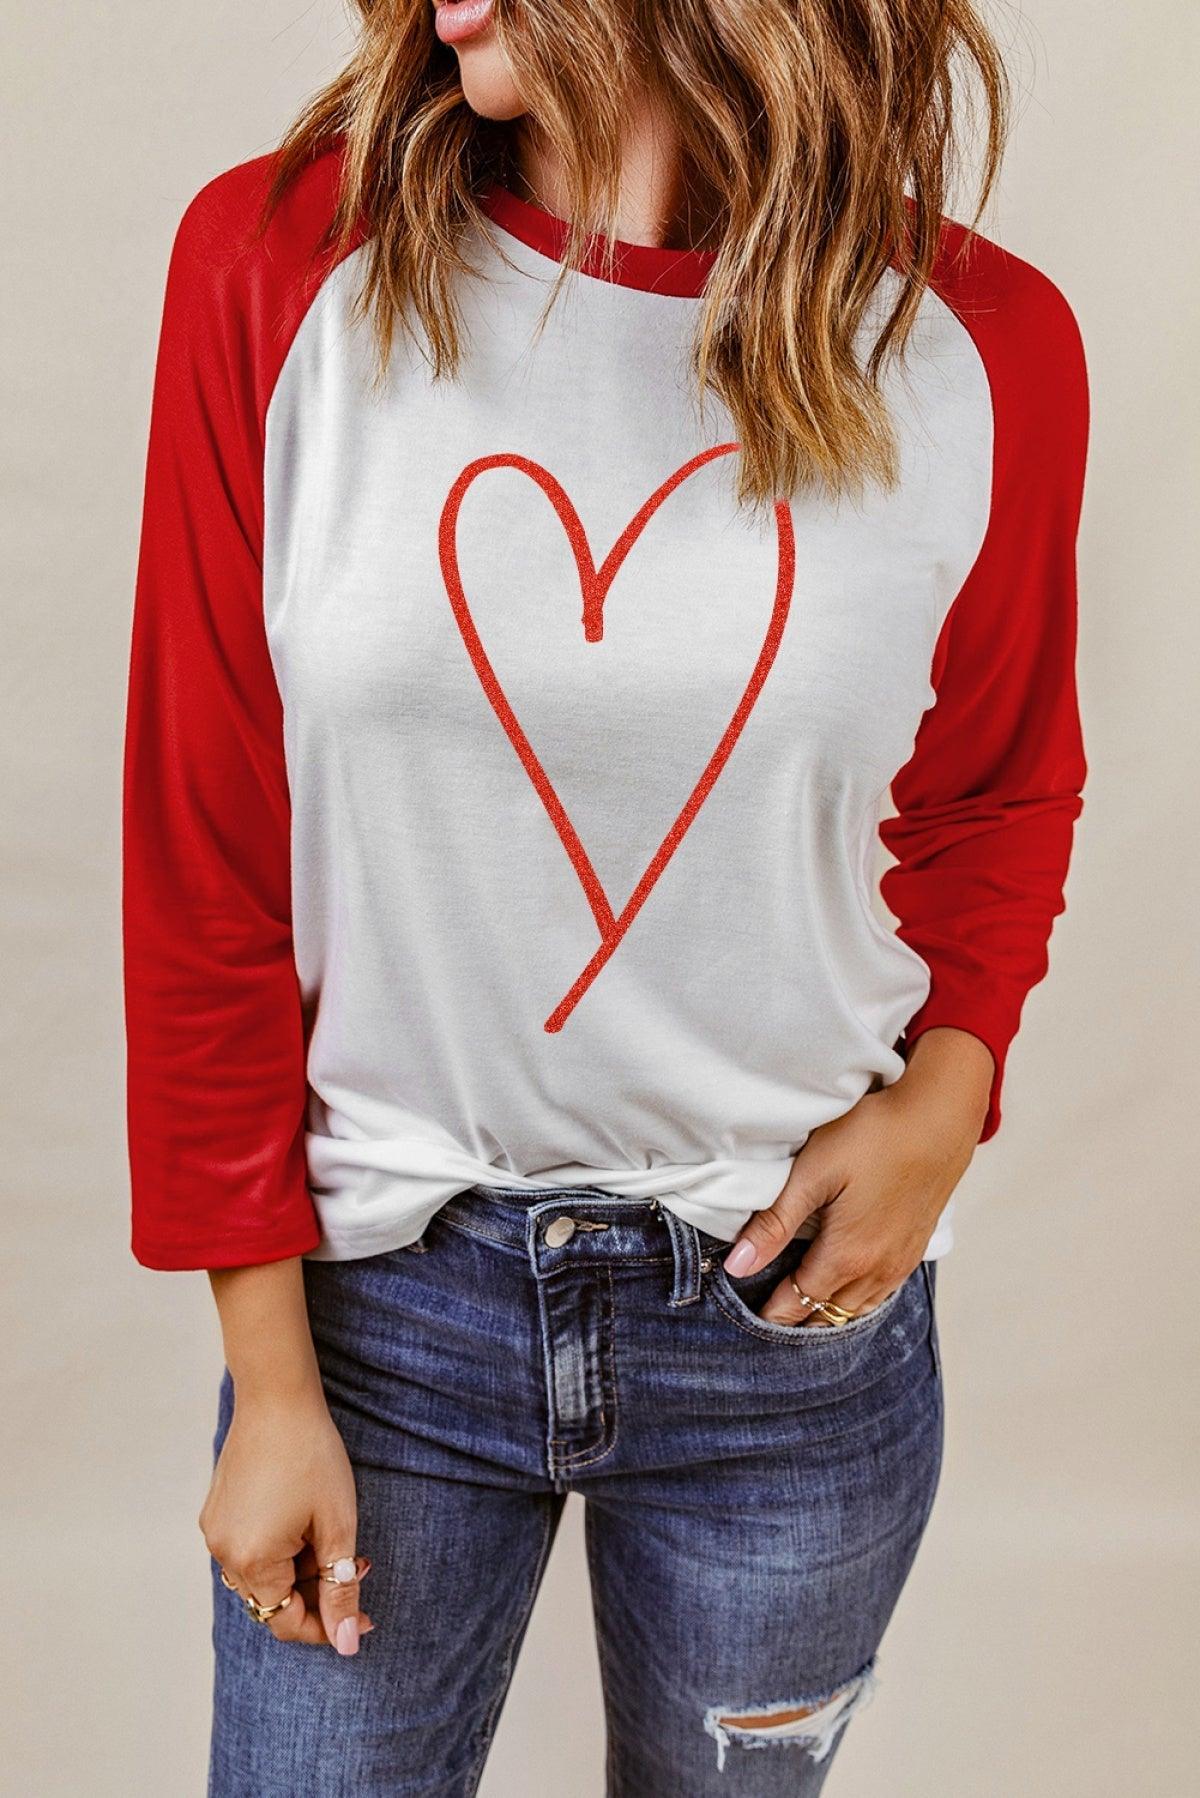 Red Heart Shaped Print Long Sleeve Color Block Top - That’s So Fletch Boutique 